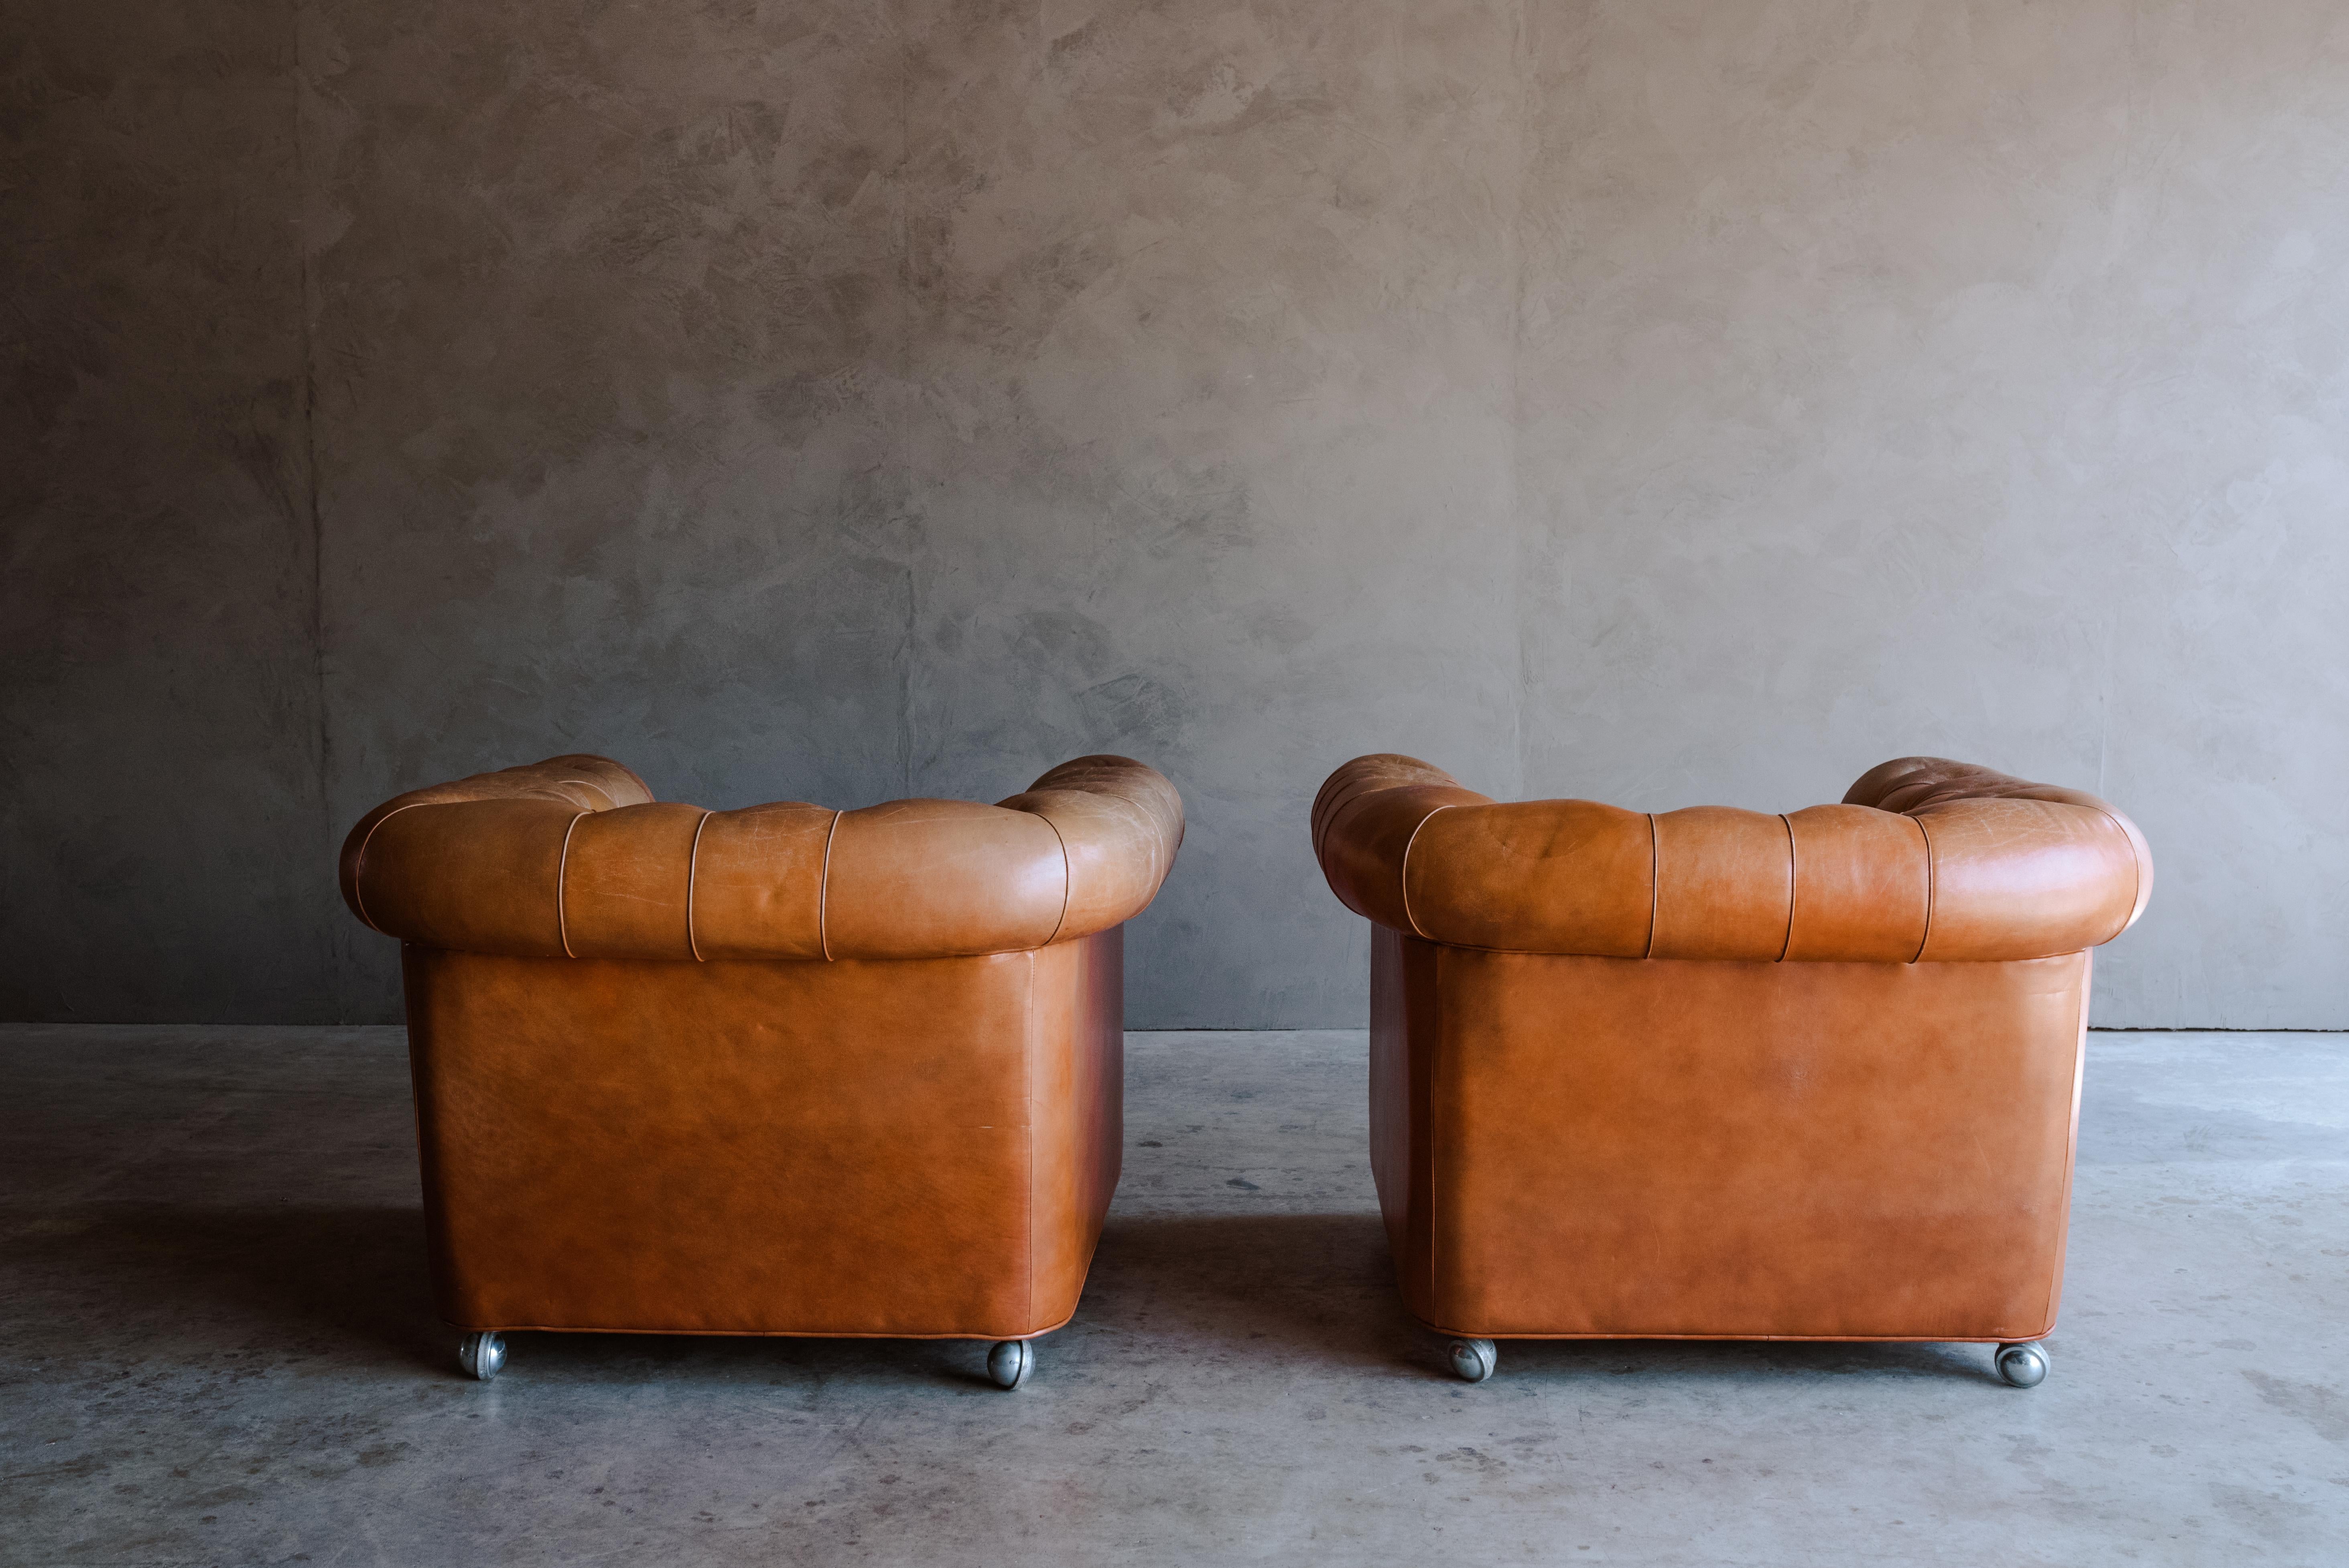 European Vintage Pair of Arne Norell Lounge Chairs from Sweden, Circa 1960